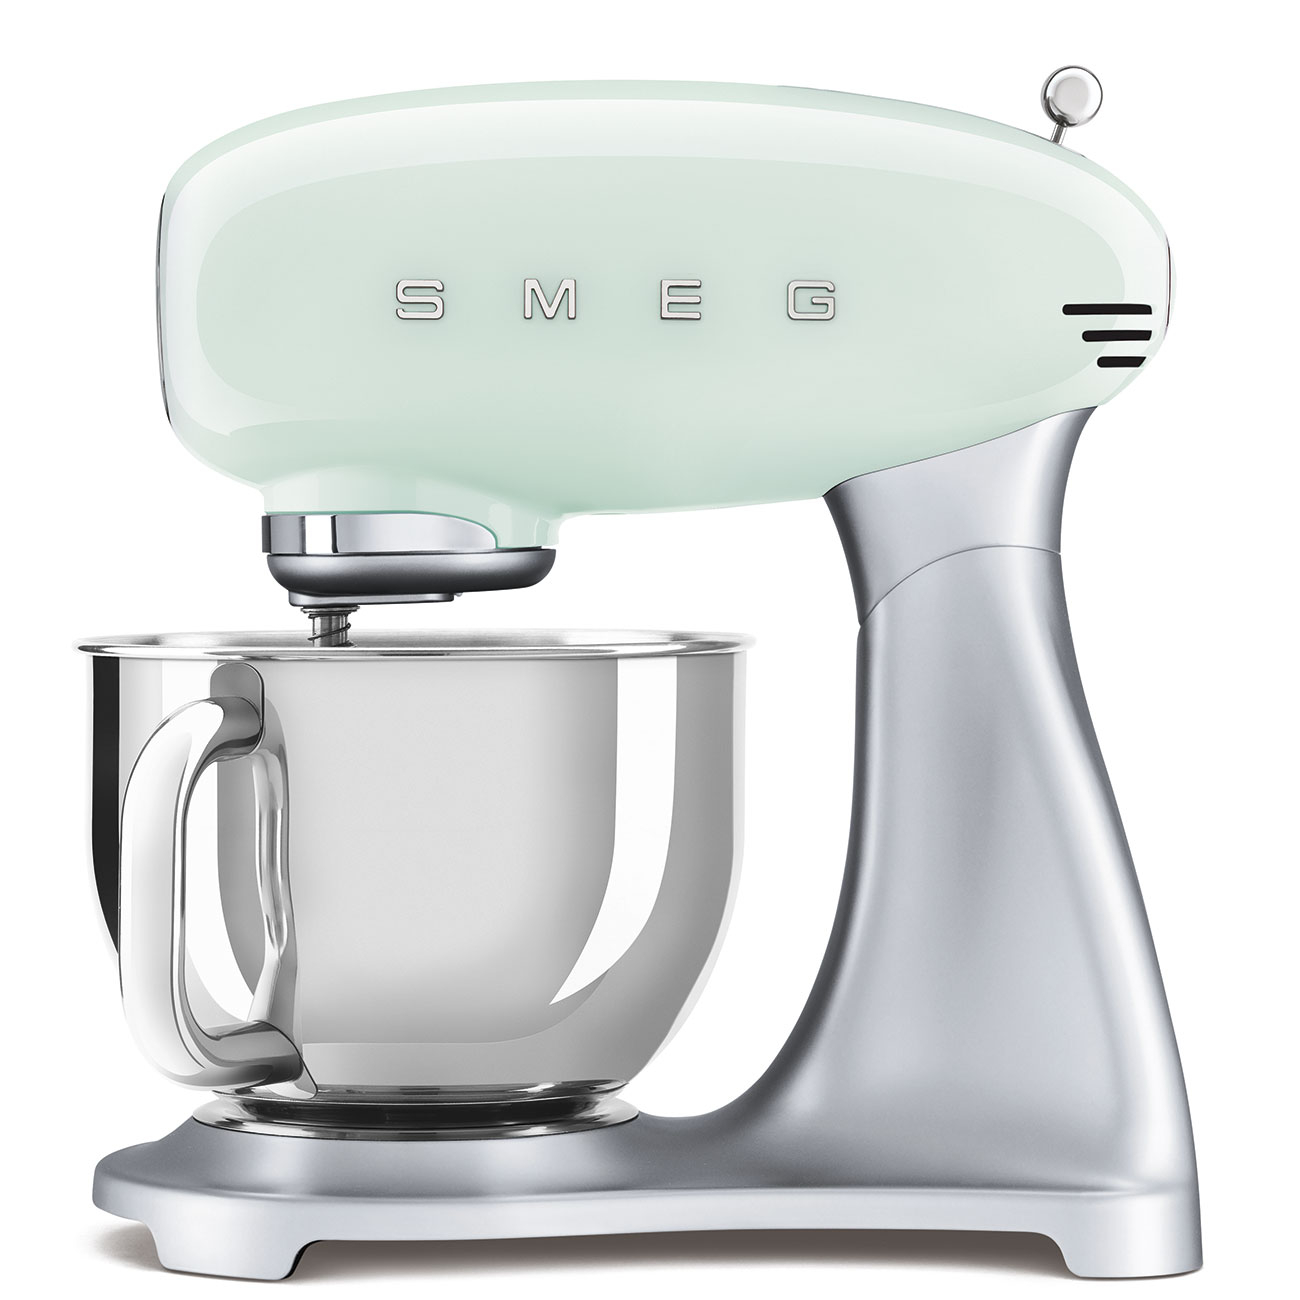 Smeg Stand Mixer, Pastel Green - Support Local - Chico Support Local – Chico